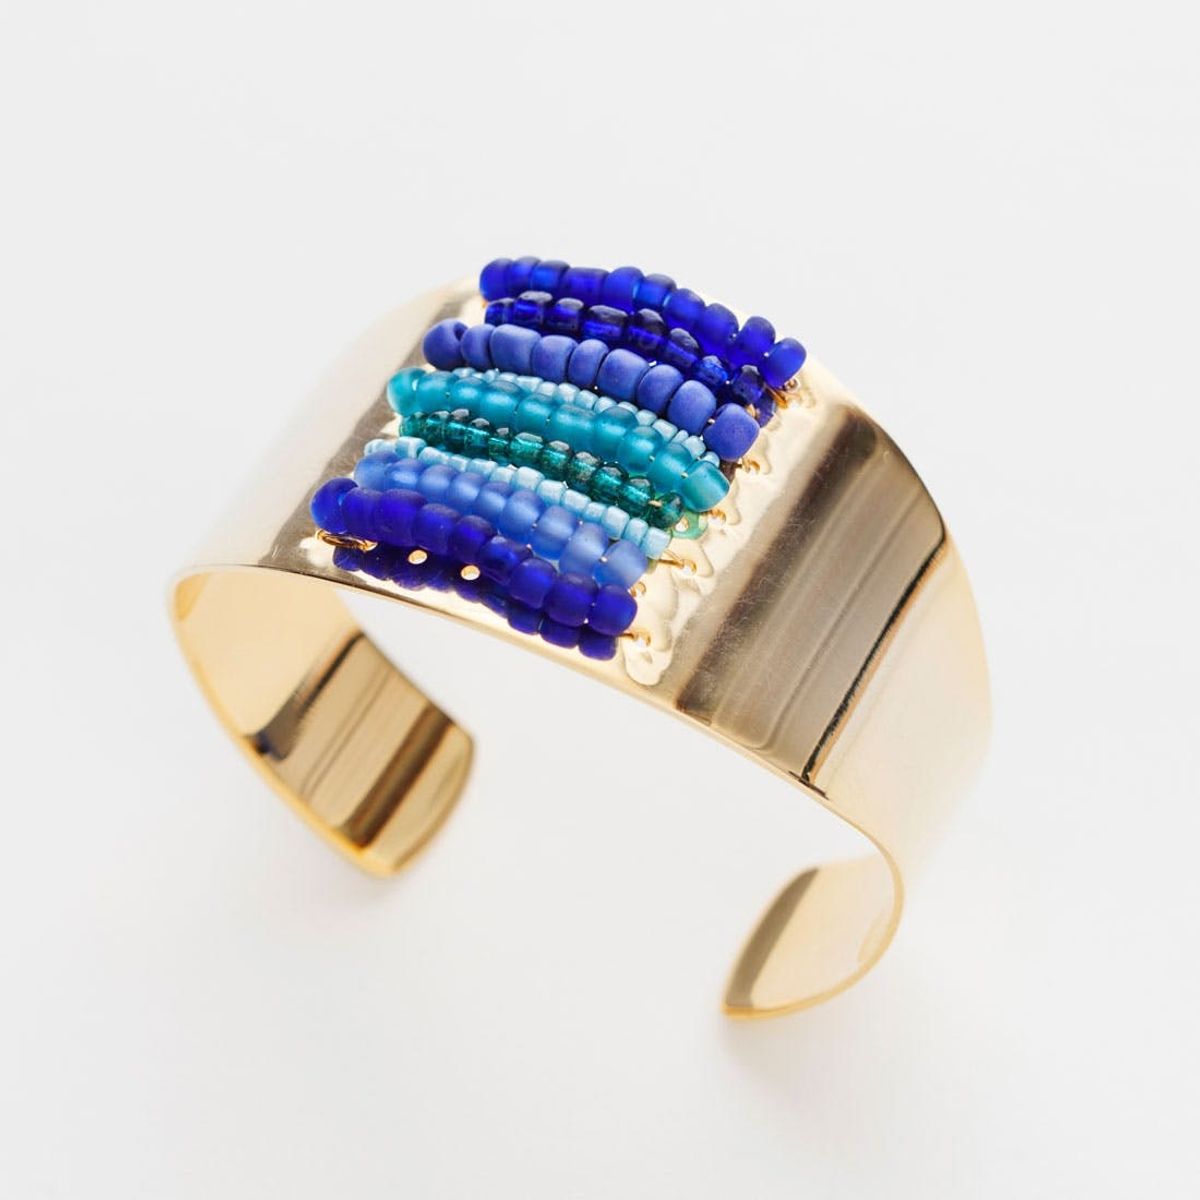 Make These Gorgeous Beaded Cuffs for Everyone on Your Nice List